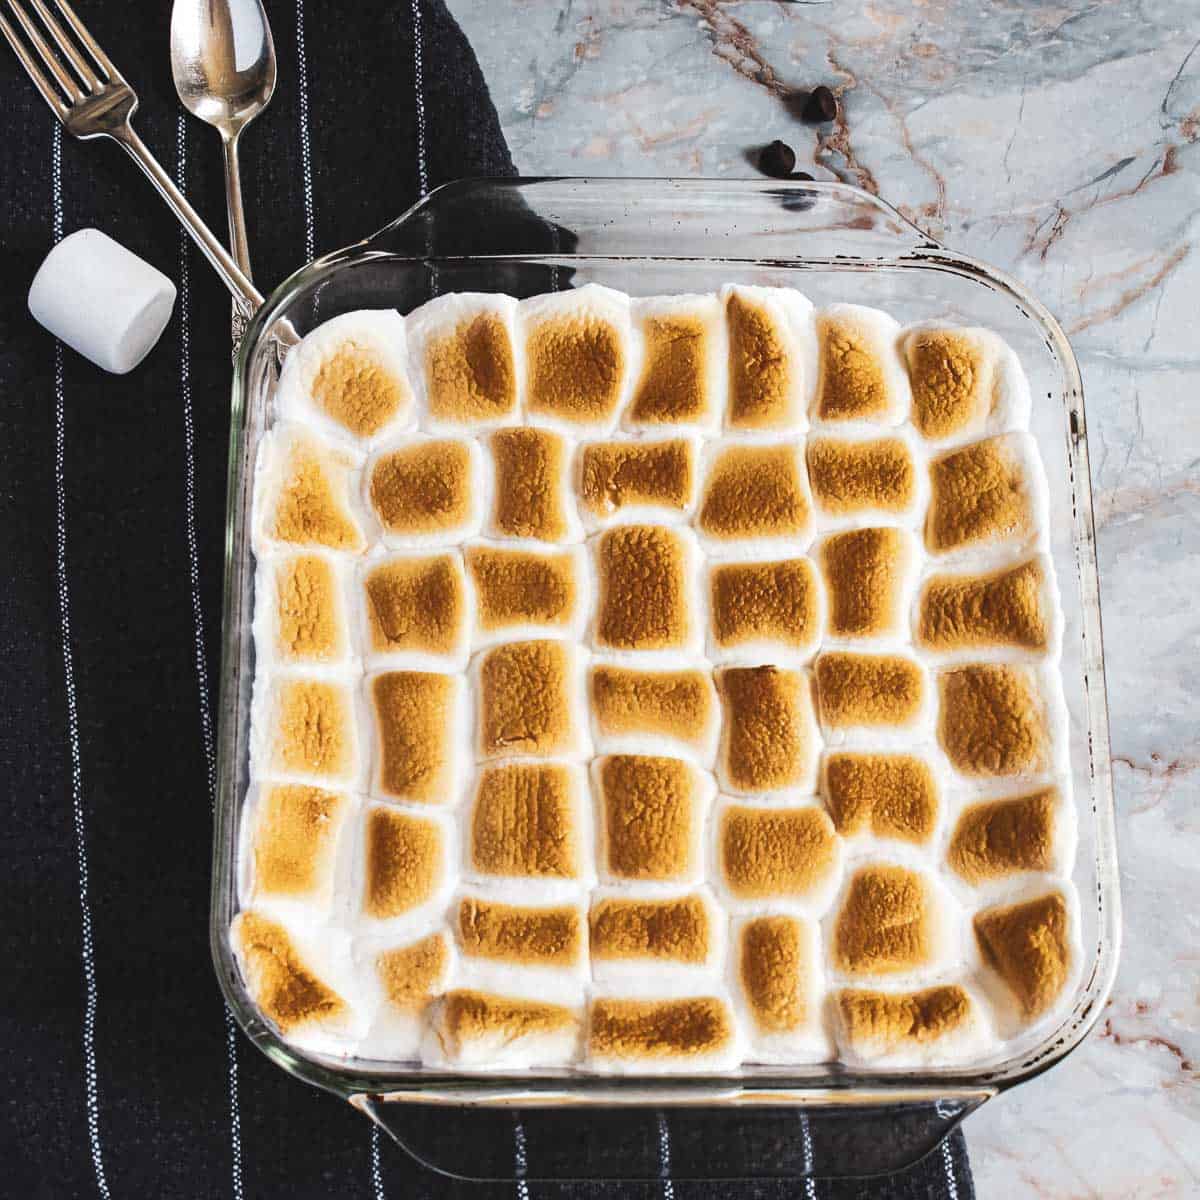 S'mores dessert topped with marshmallows.